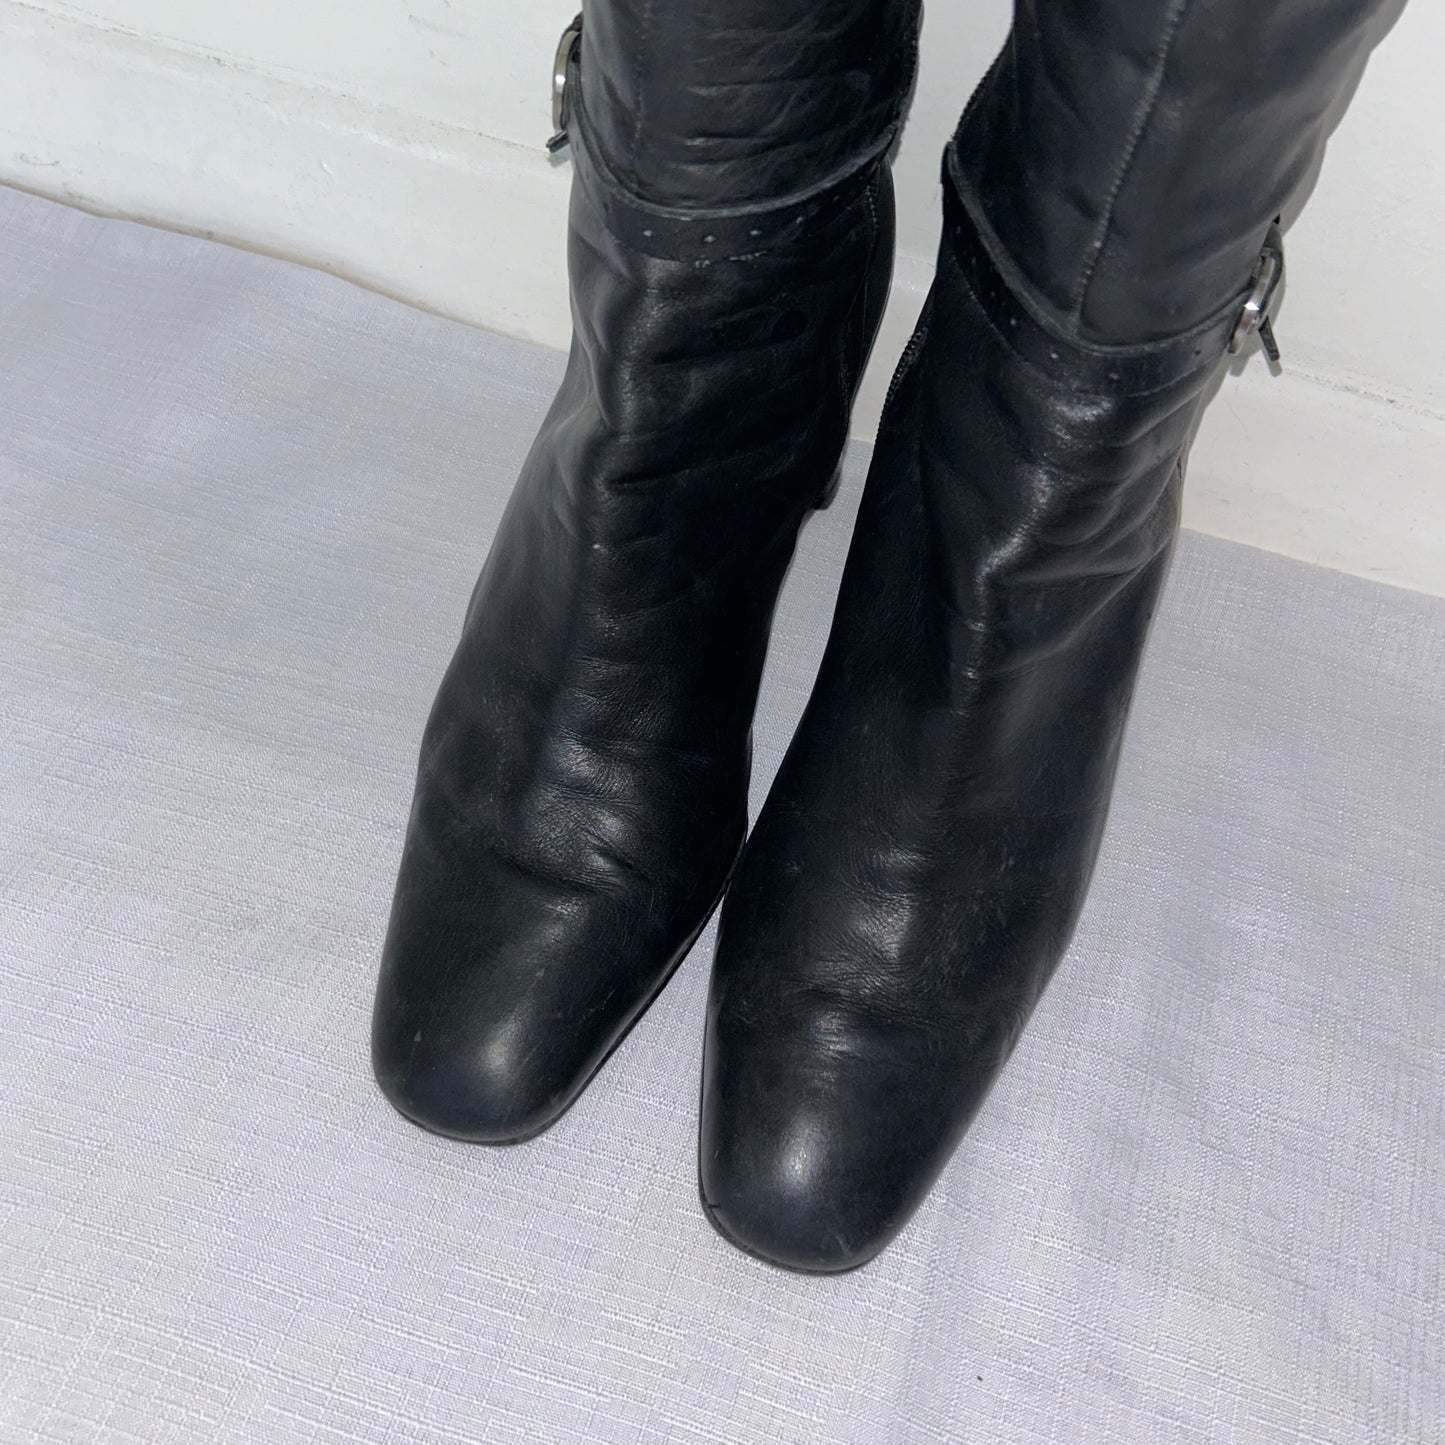 toes of black knee high leather buckle boots on a white background